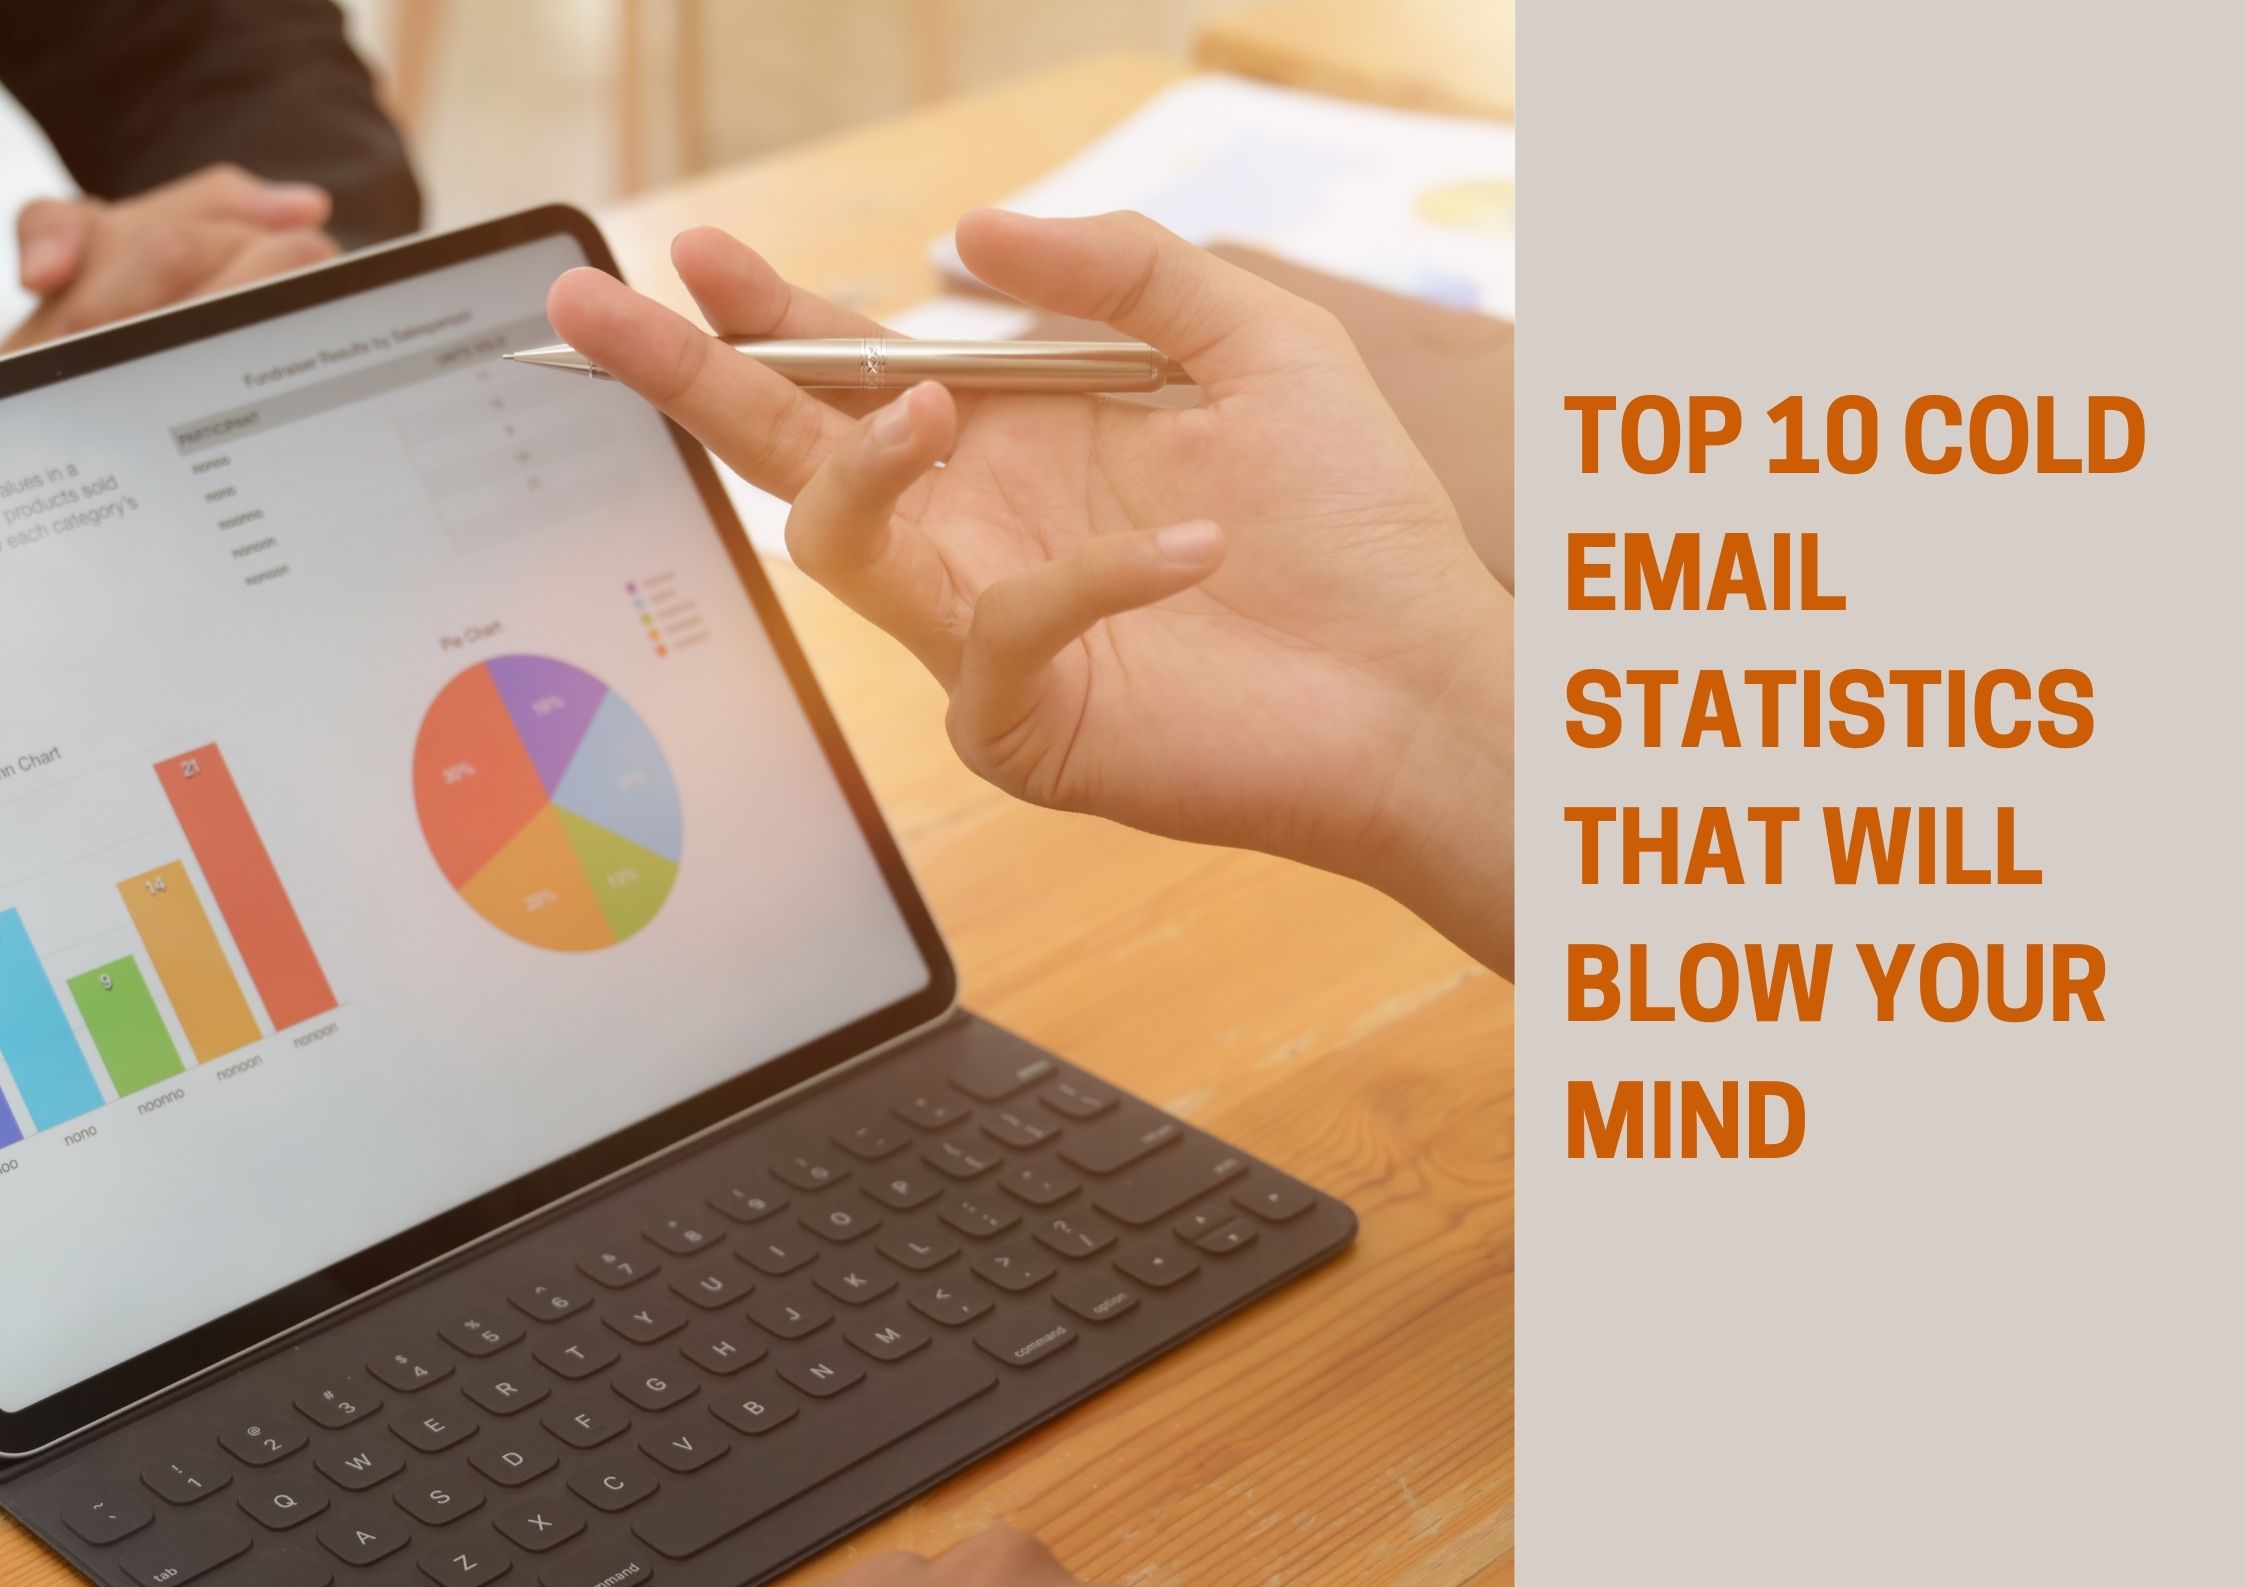 Top 10 Cold Email Statistics